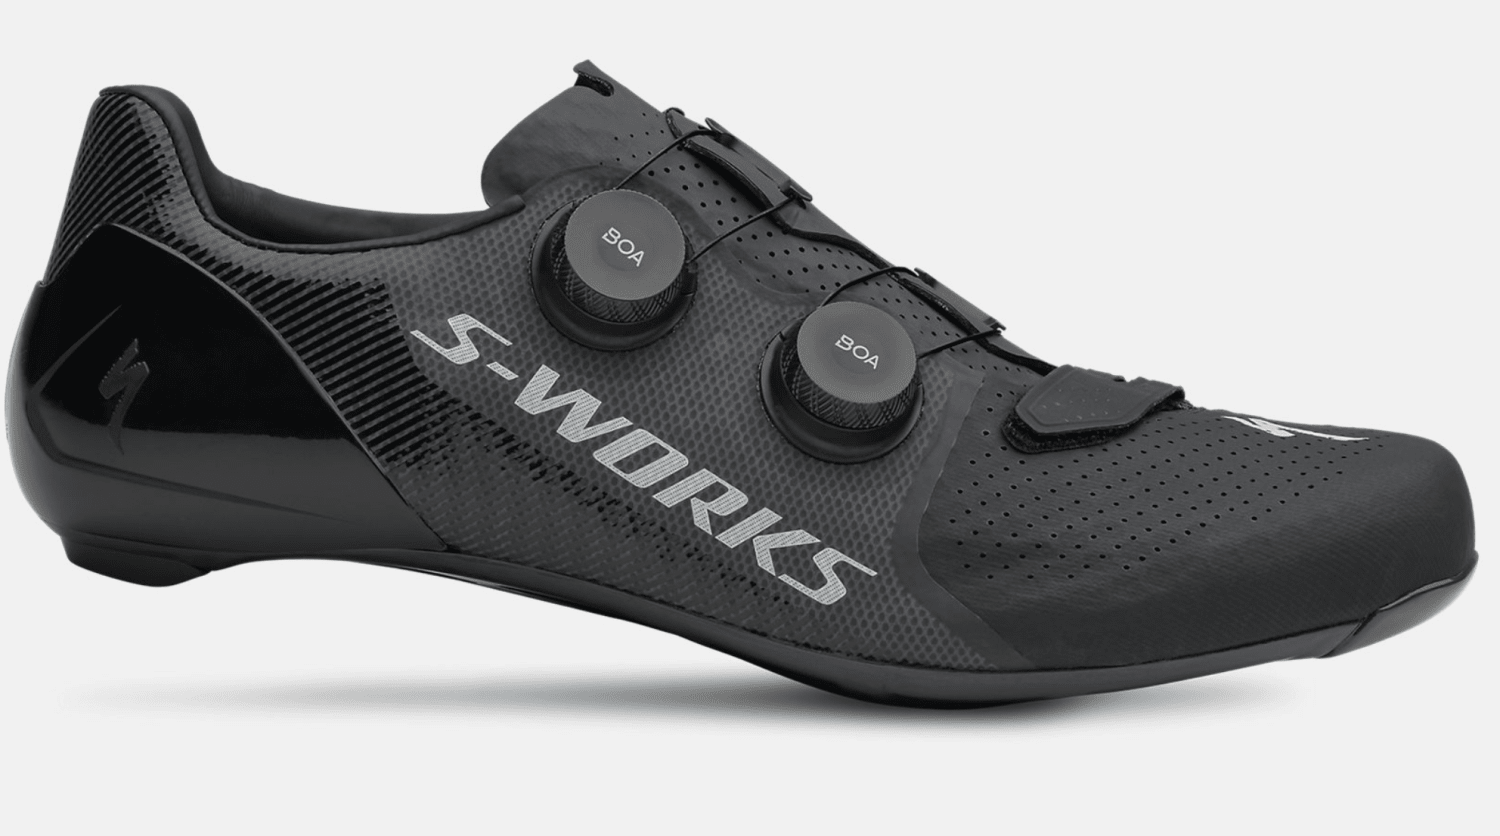 Details about   Mountain Cycling Shoes Men Bike Sneakers Spin Peloton Cleat Bicycle Racing Shoes 